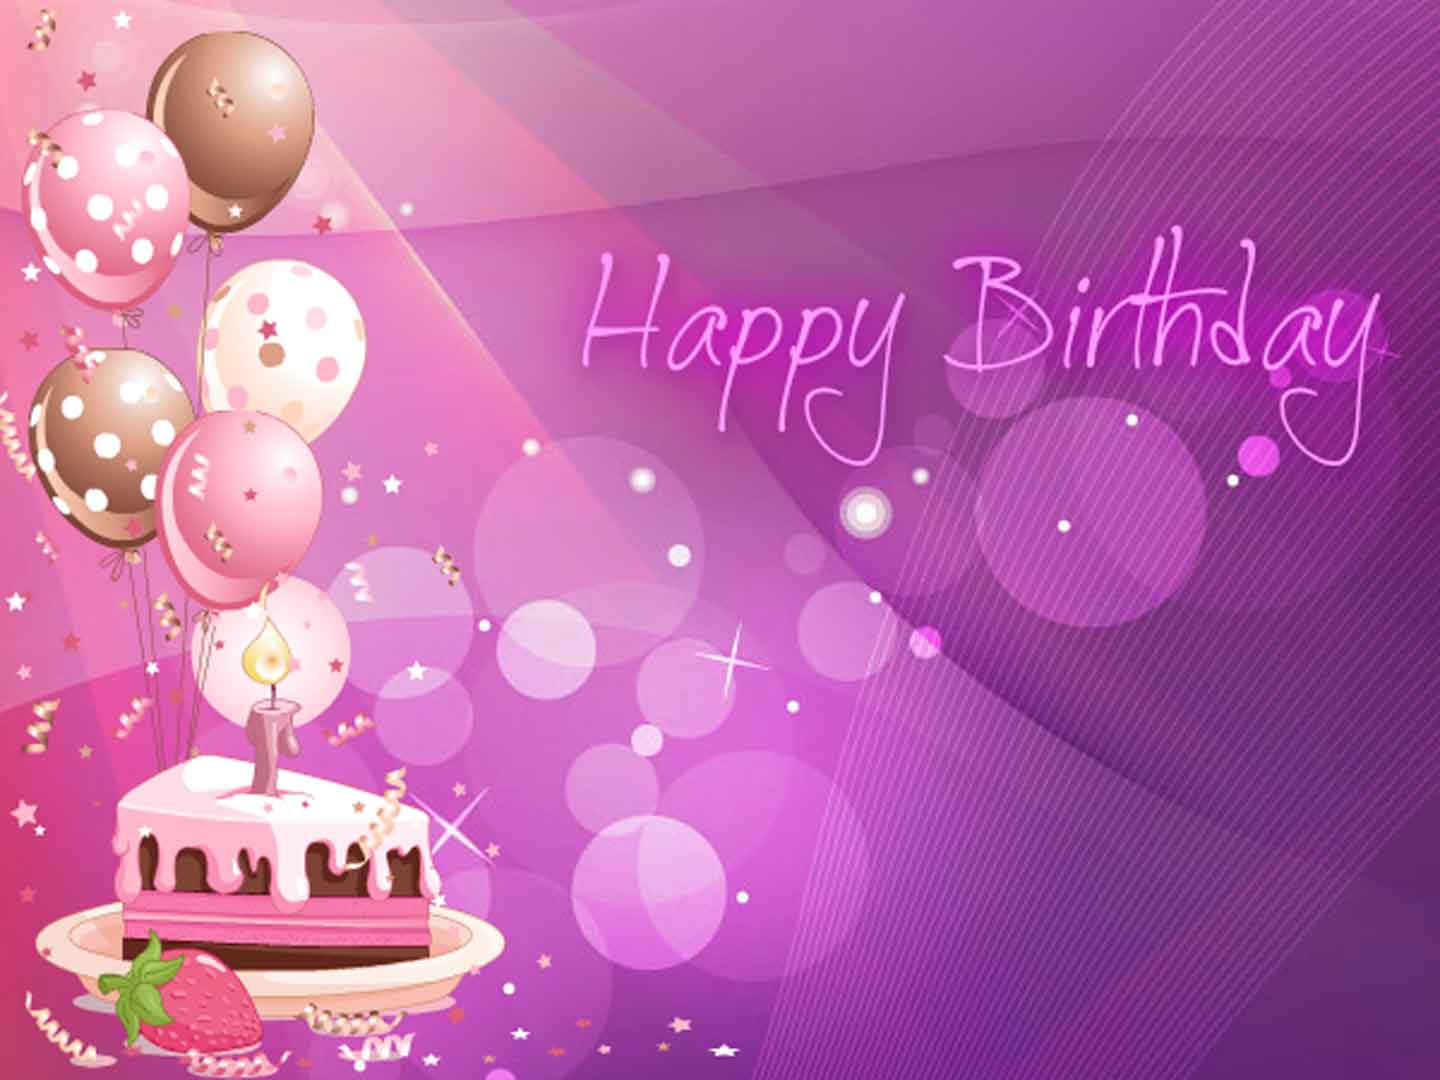 Happy Birthday Cake Backgrounds Wallpapers